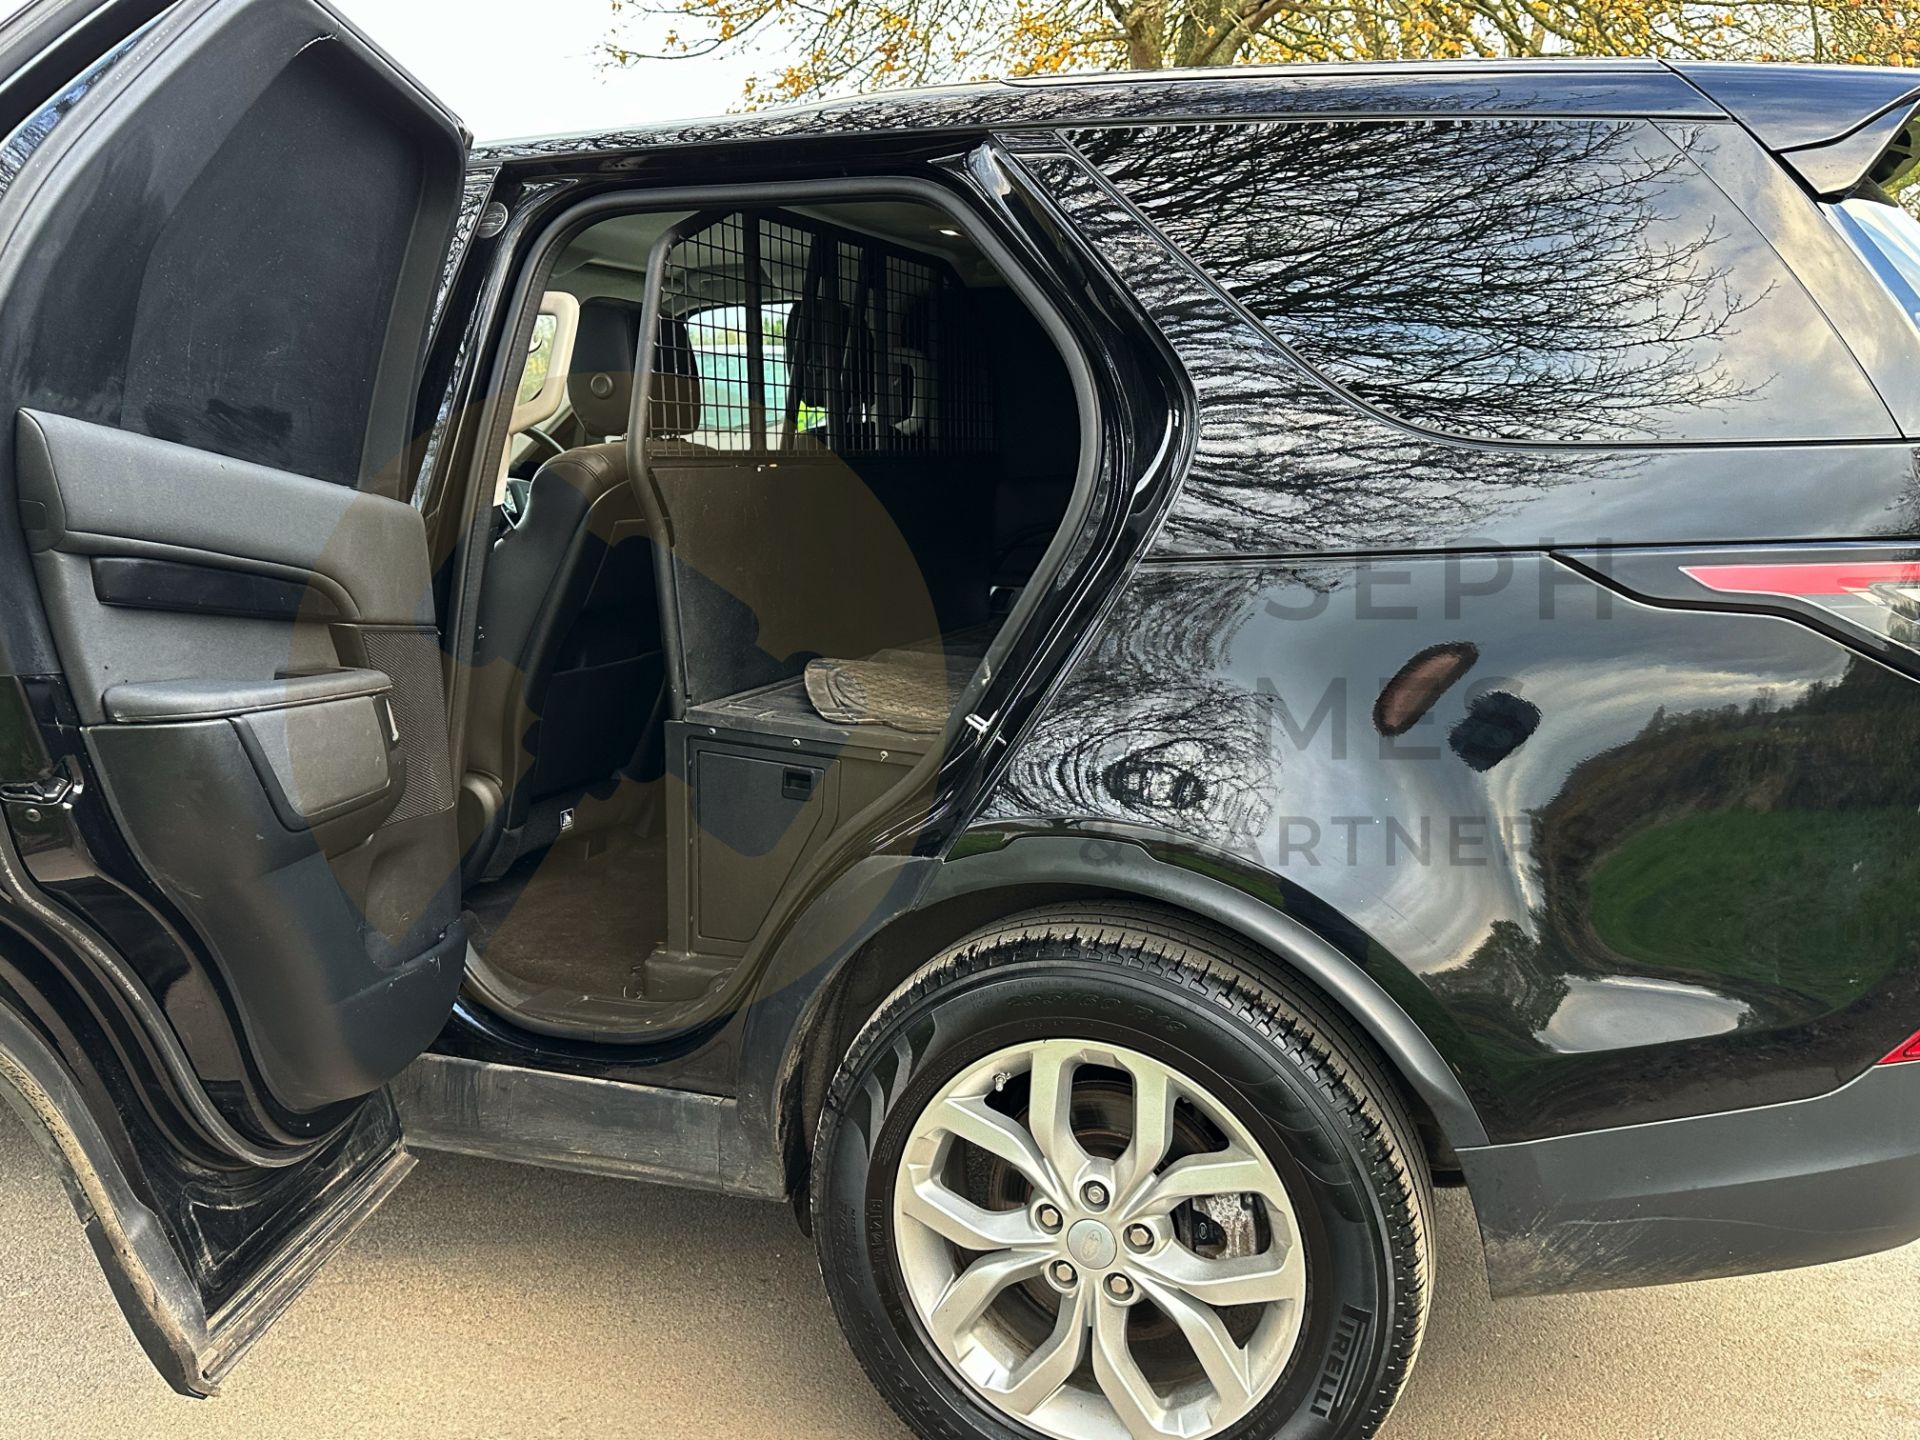 LAND ROVER DISCOVERY 5 *ALL NEW MODEL* (2021 - EURO 6) 8 SPEED AUTO (1 OWNER) *ONLY 19,000 MILES* - Image 26 of 50